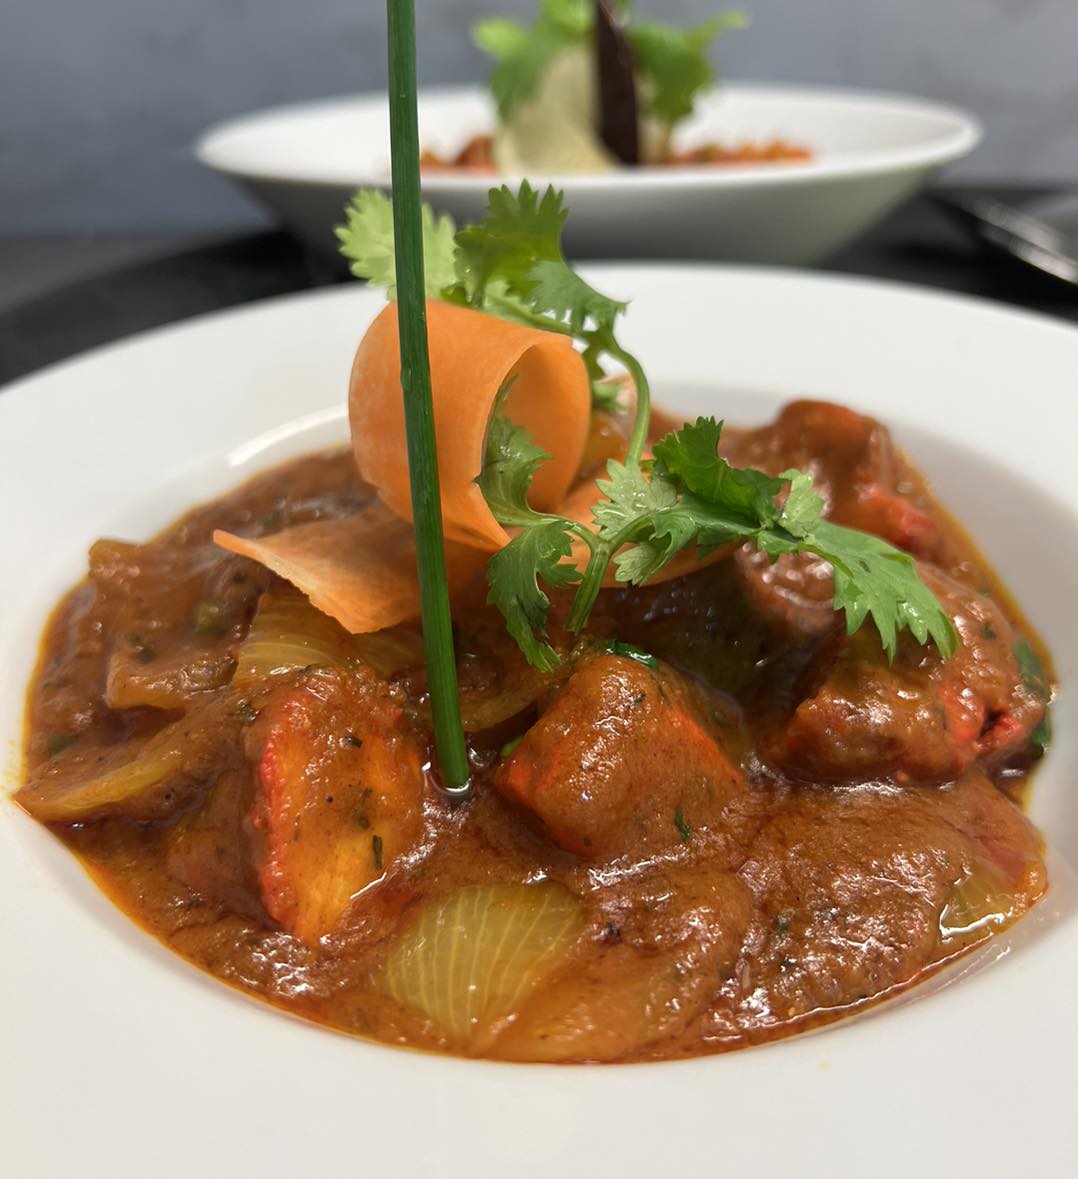 The Milnrow Balti Restaurant in Rochdale has been named the best curry house in the UK. Credit: Facebook